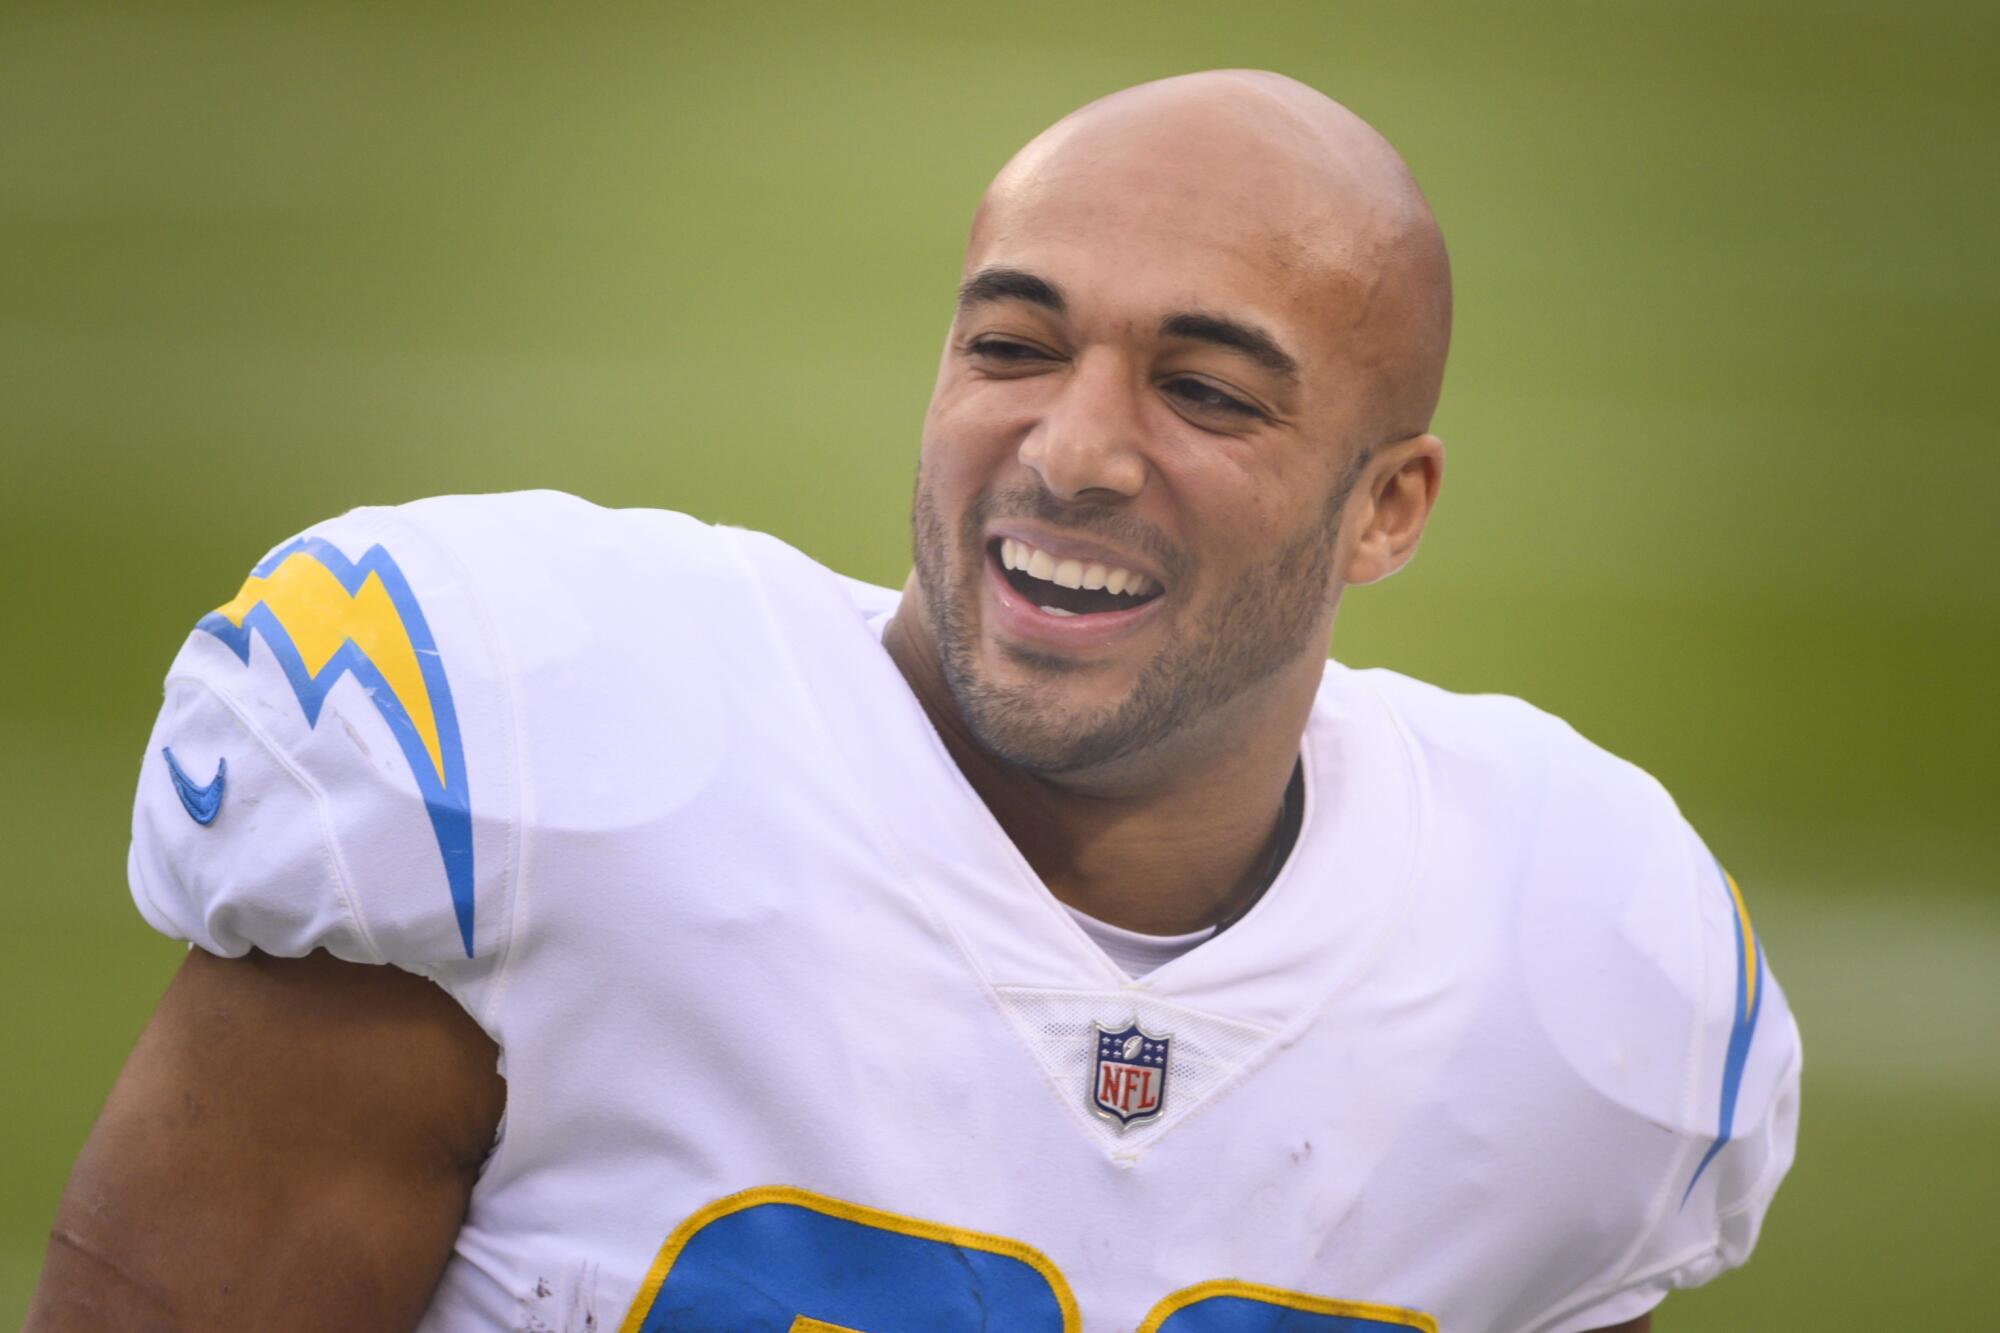 Chargers running back Austin Ekeler laughs on the sideline.